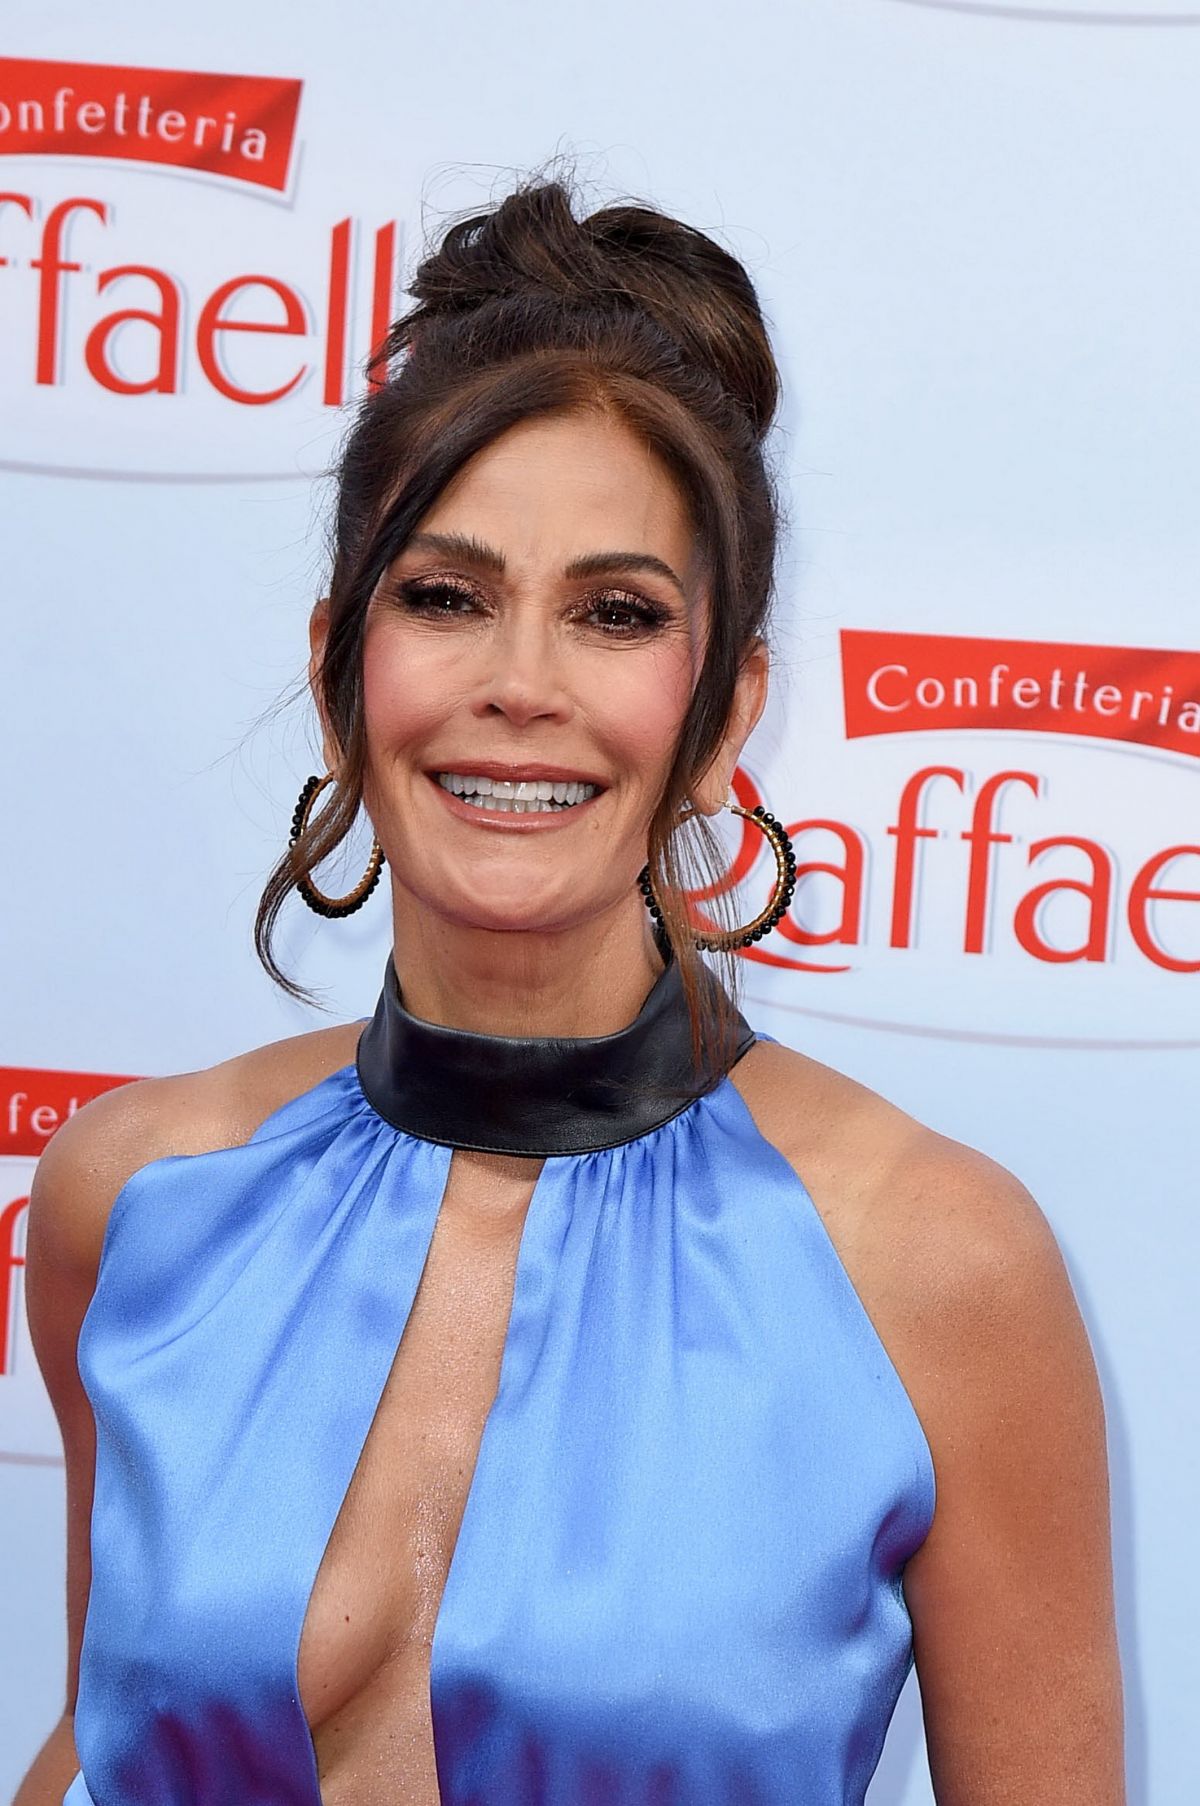 Teri Hatcher Got Them Tits Out of the